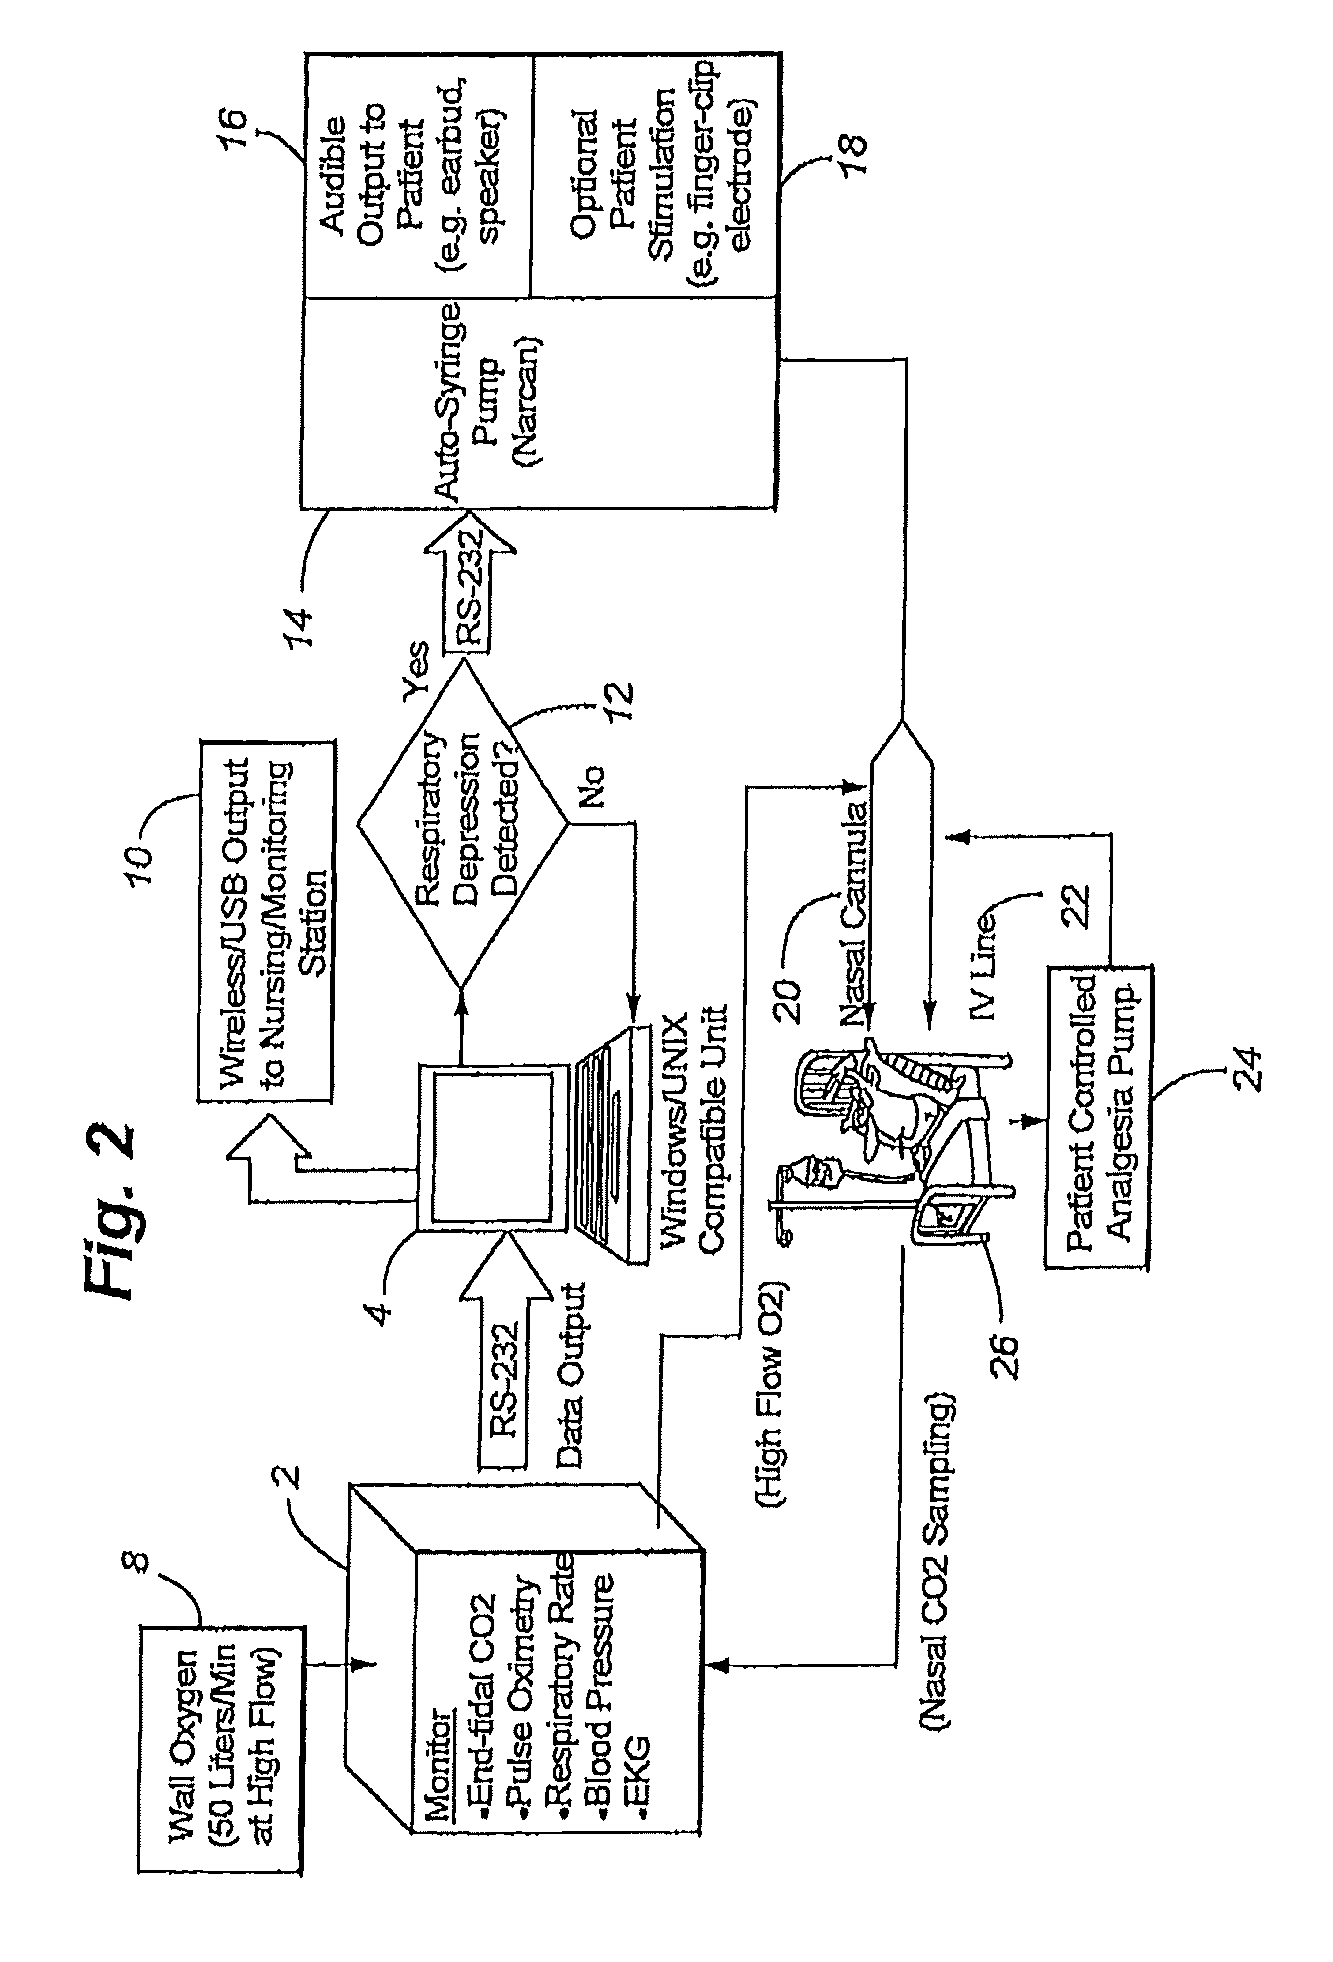 Apparatus and method of monitoring and responding to respiratory depression